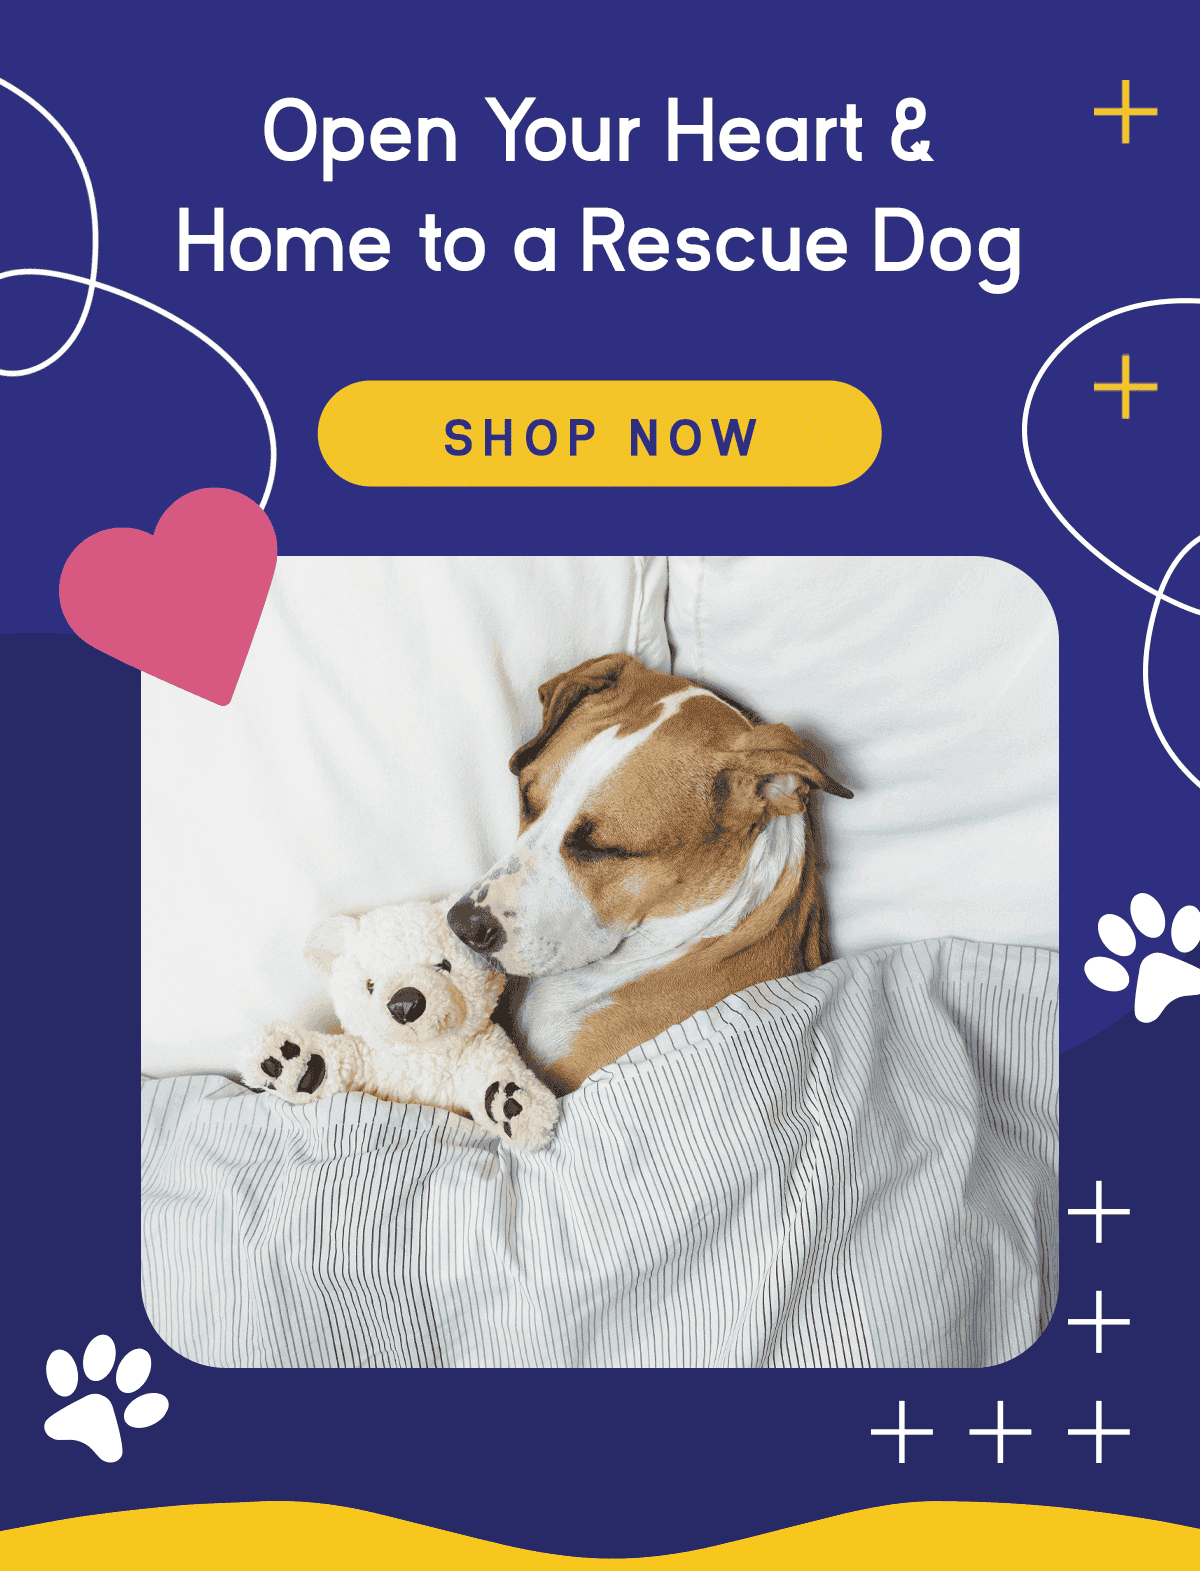 Open your heart & Home to a rescue